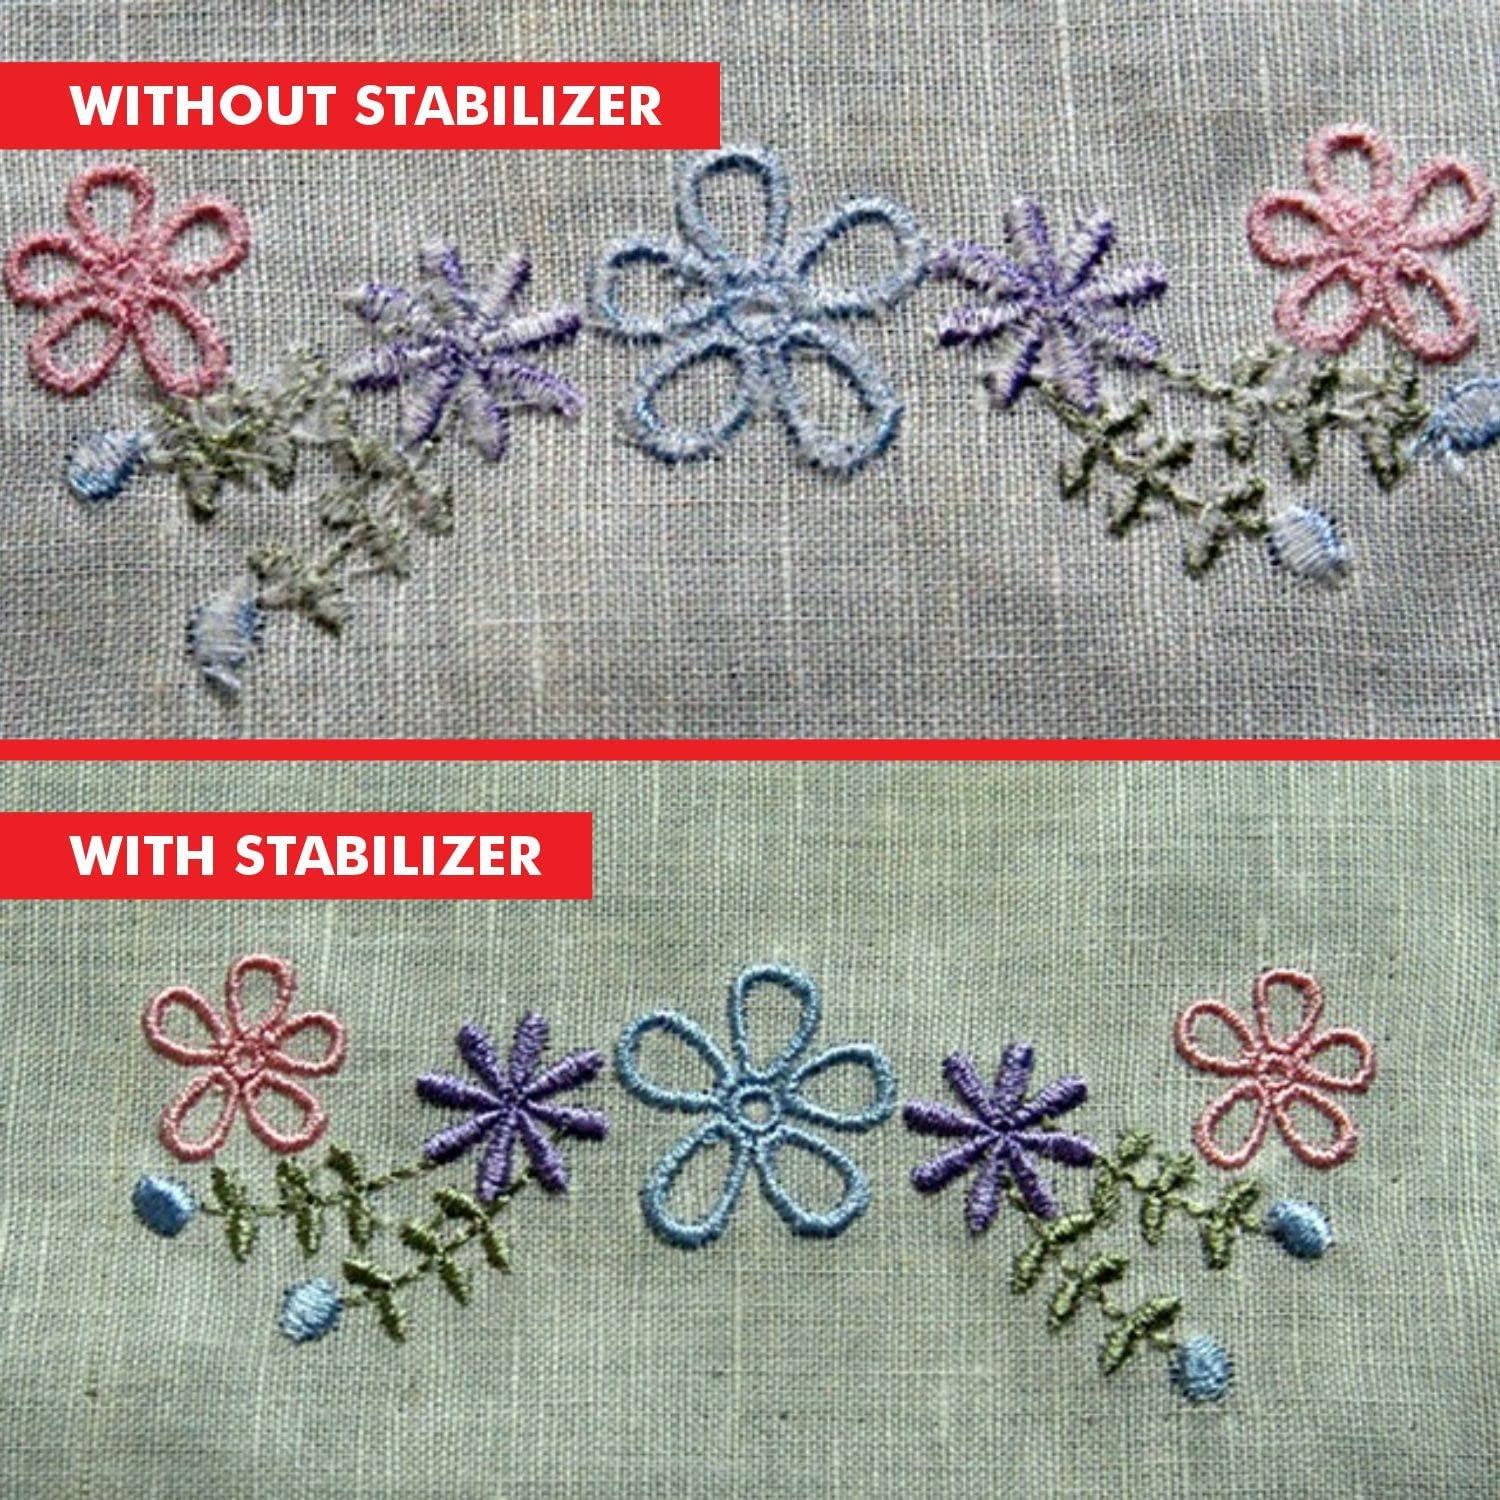  Water Soluble Embroidery Stabilizers Stick and Stitch Embroidery  Paper for Embroidery Stick and Stitch Embroidery Paper Tear Away Embroidery  Stabilizers for Embroidery Hand Sewing Lover Beginners